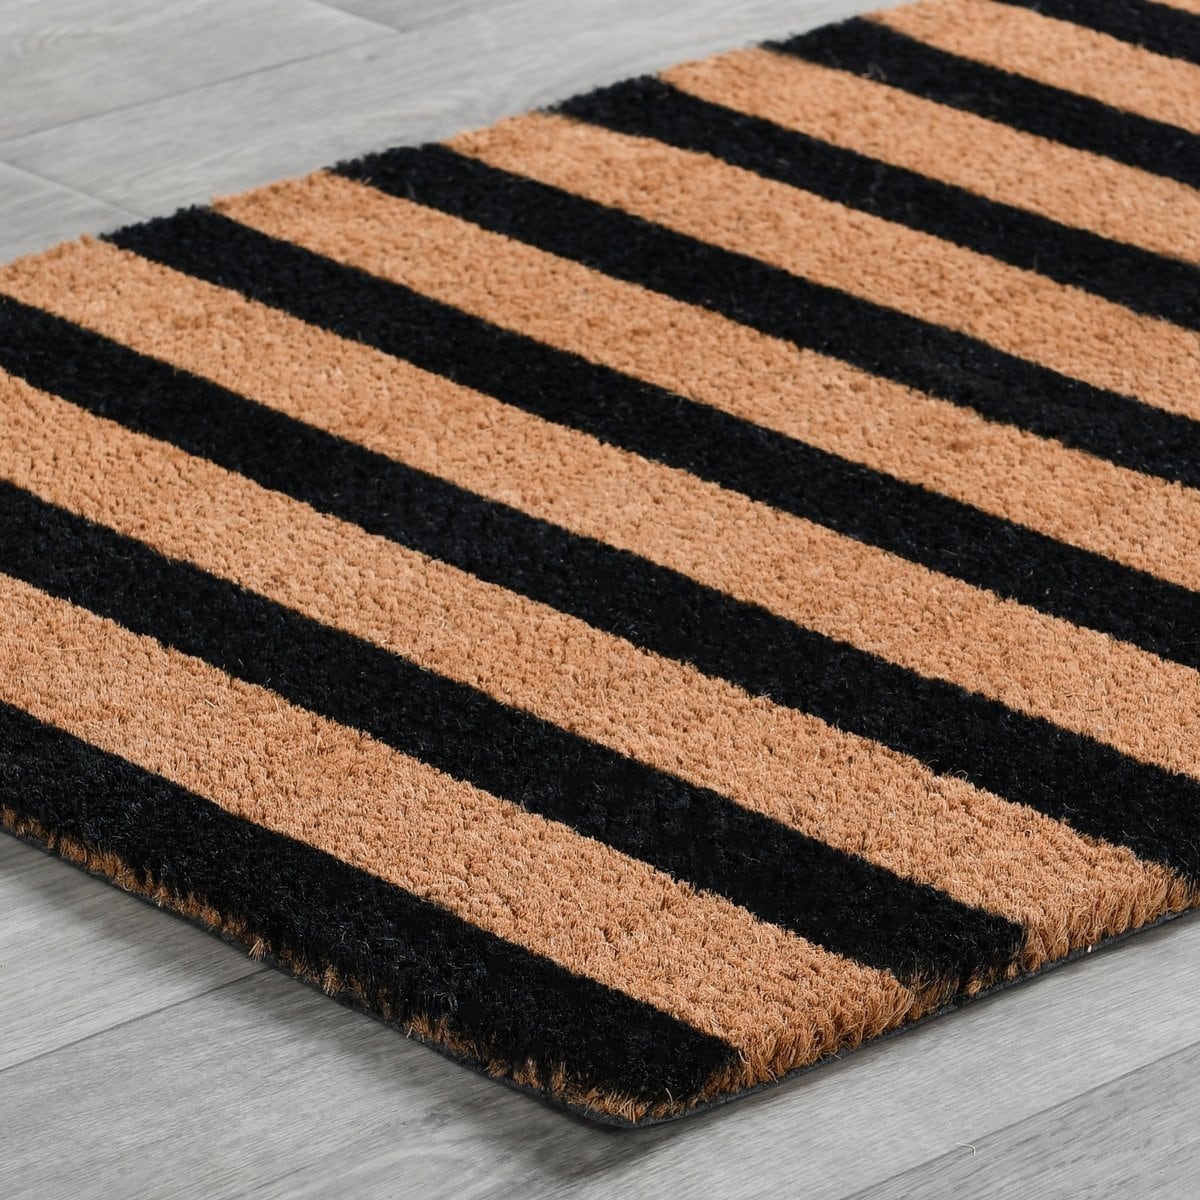 https://ak1.ostkcdn.com/images/products/is/images/direct/19f5456081d71f30d26794e5c786ce84e5f70c8b/Striped-Black-and-Natural-24x57-Doormat-by-Kosas-Home.jpg